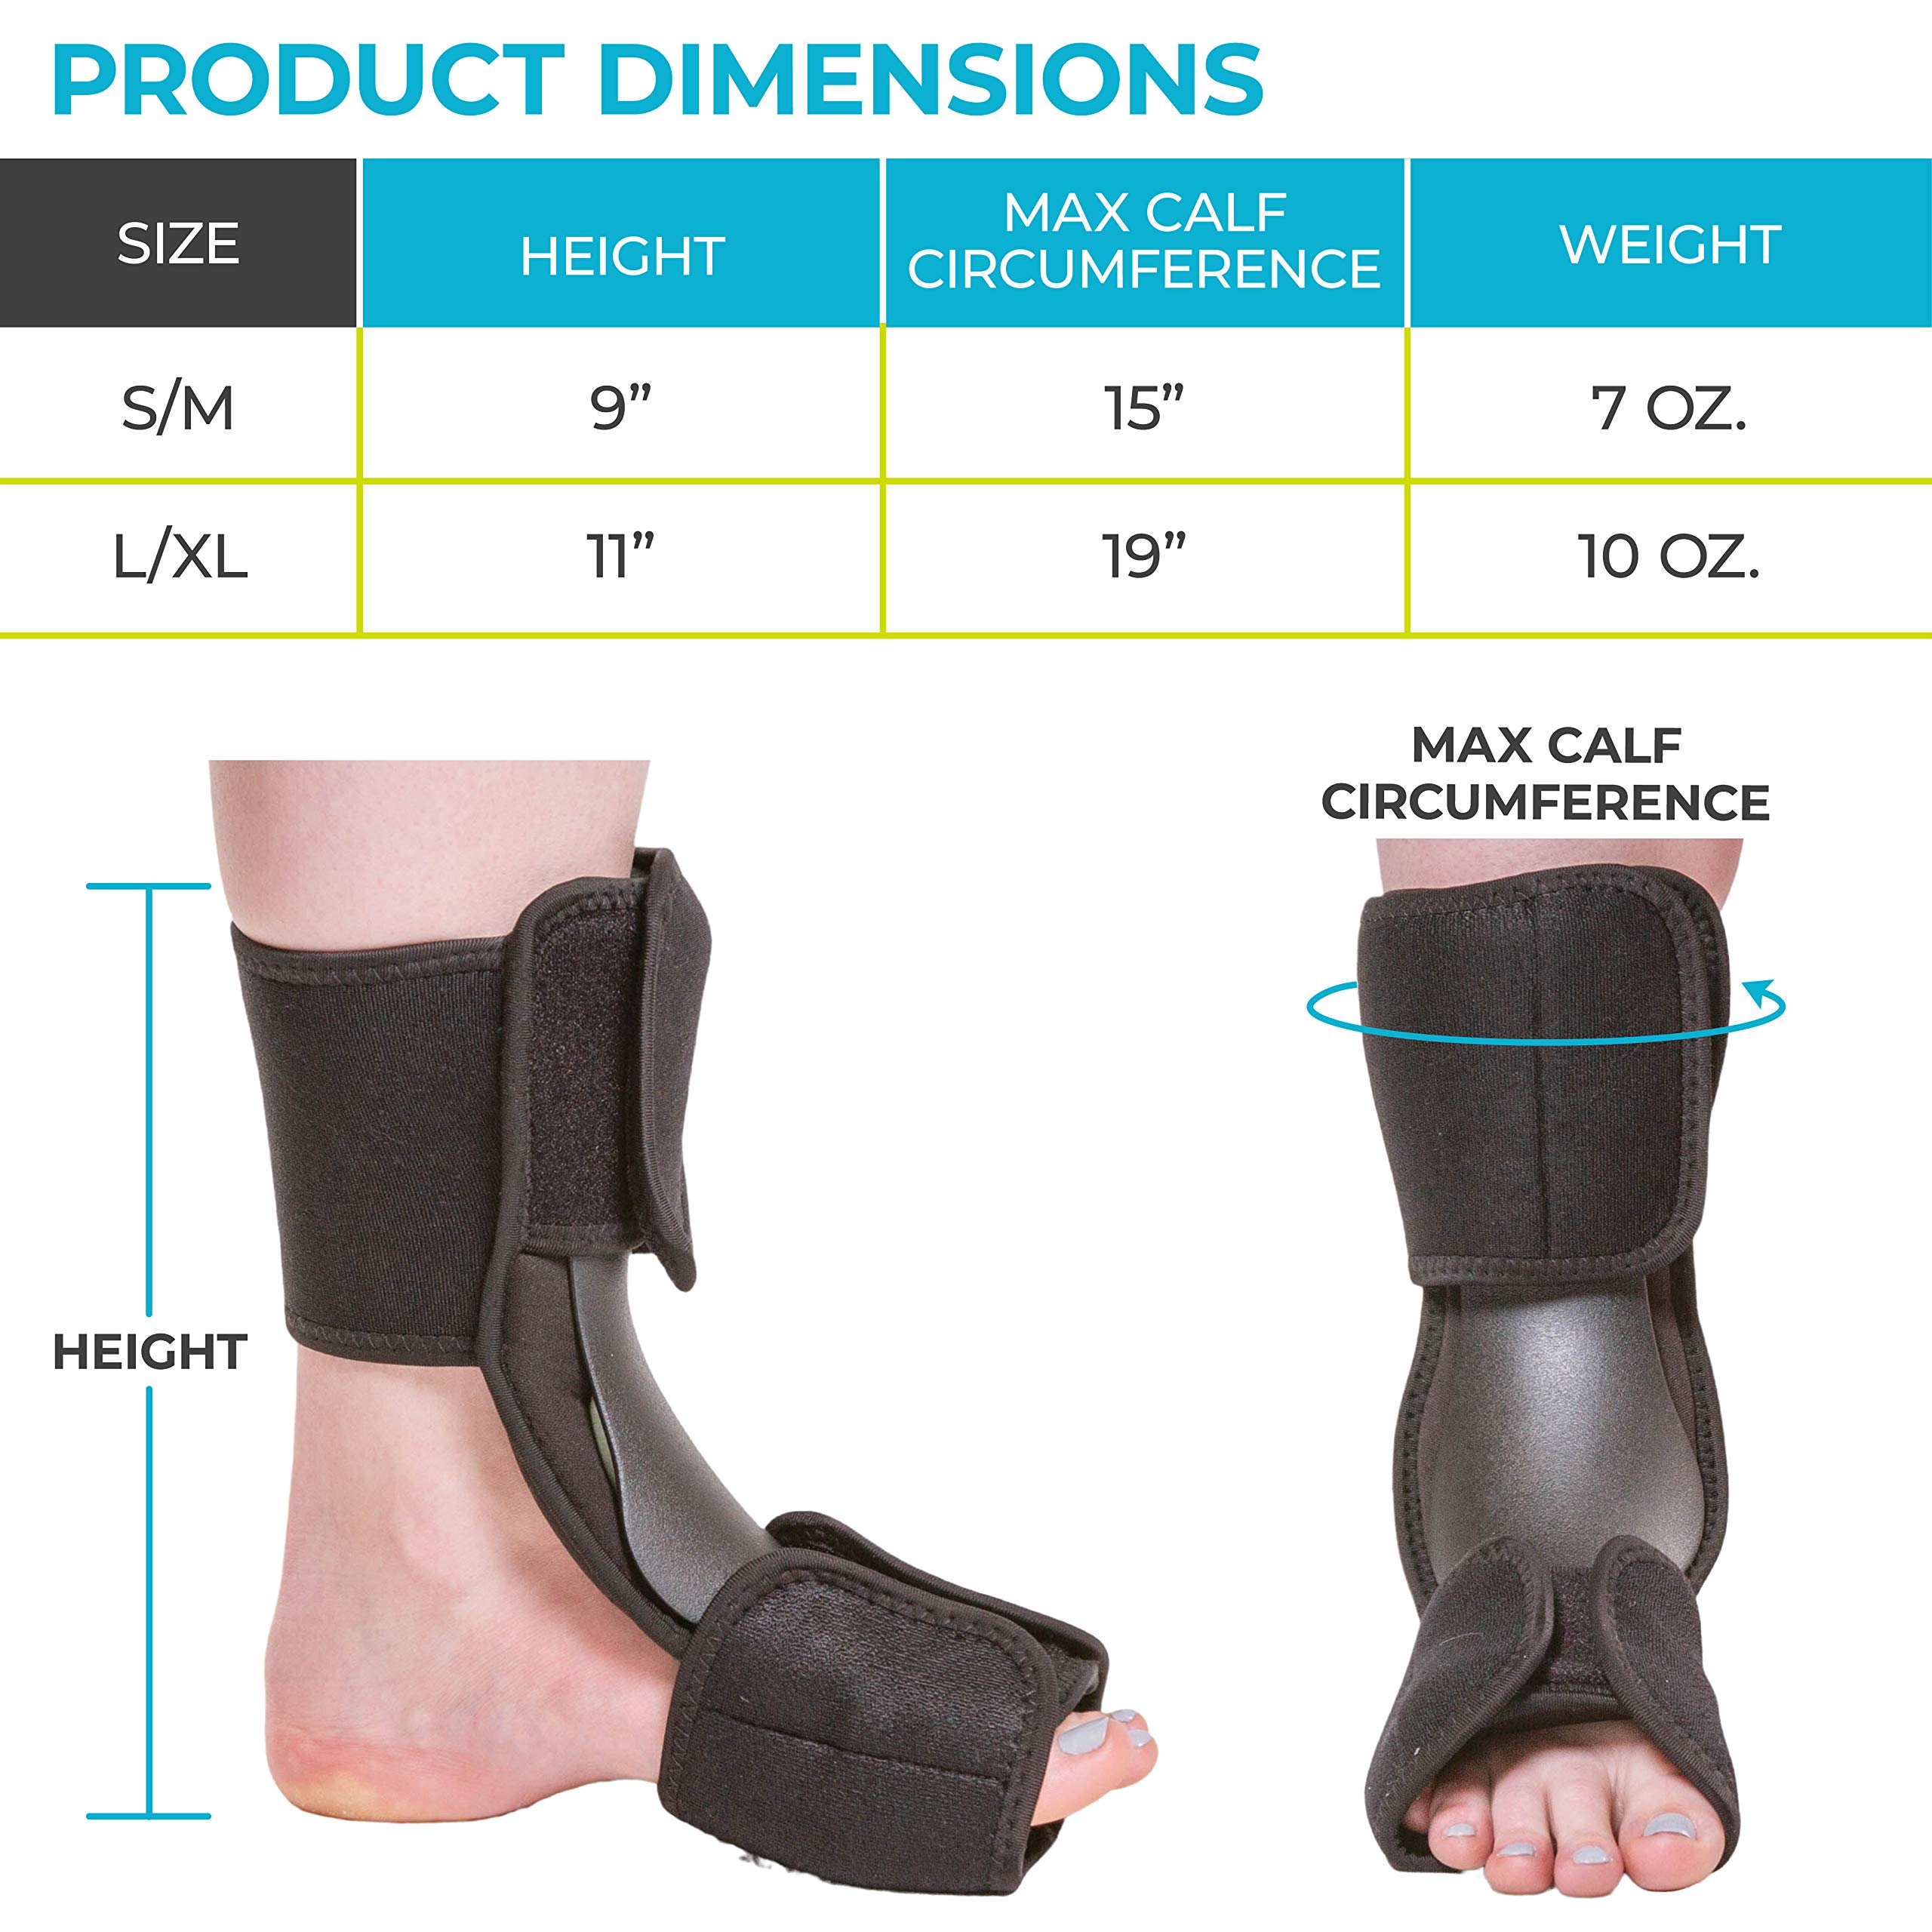 BraceAbility Dorsal Night Splint | Plantar Fasciitis Pain Relief, Foot Drop Brace for Sleeping, and Achilles Tendon Stretcher Boot for Nighttime Ankle Dorsiflexion (L/XL)